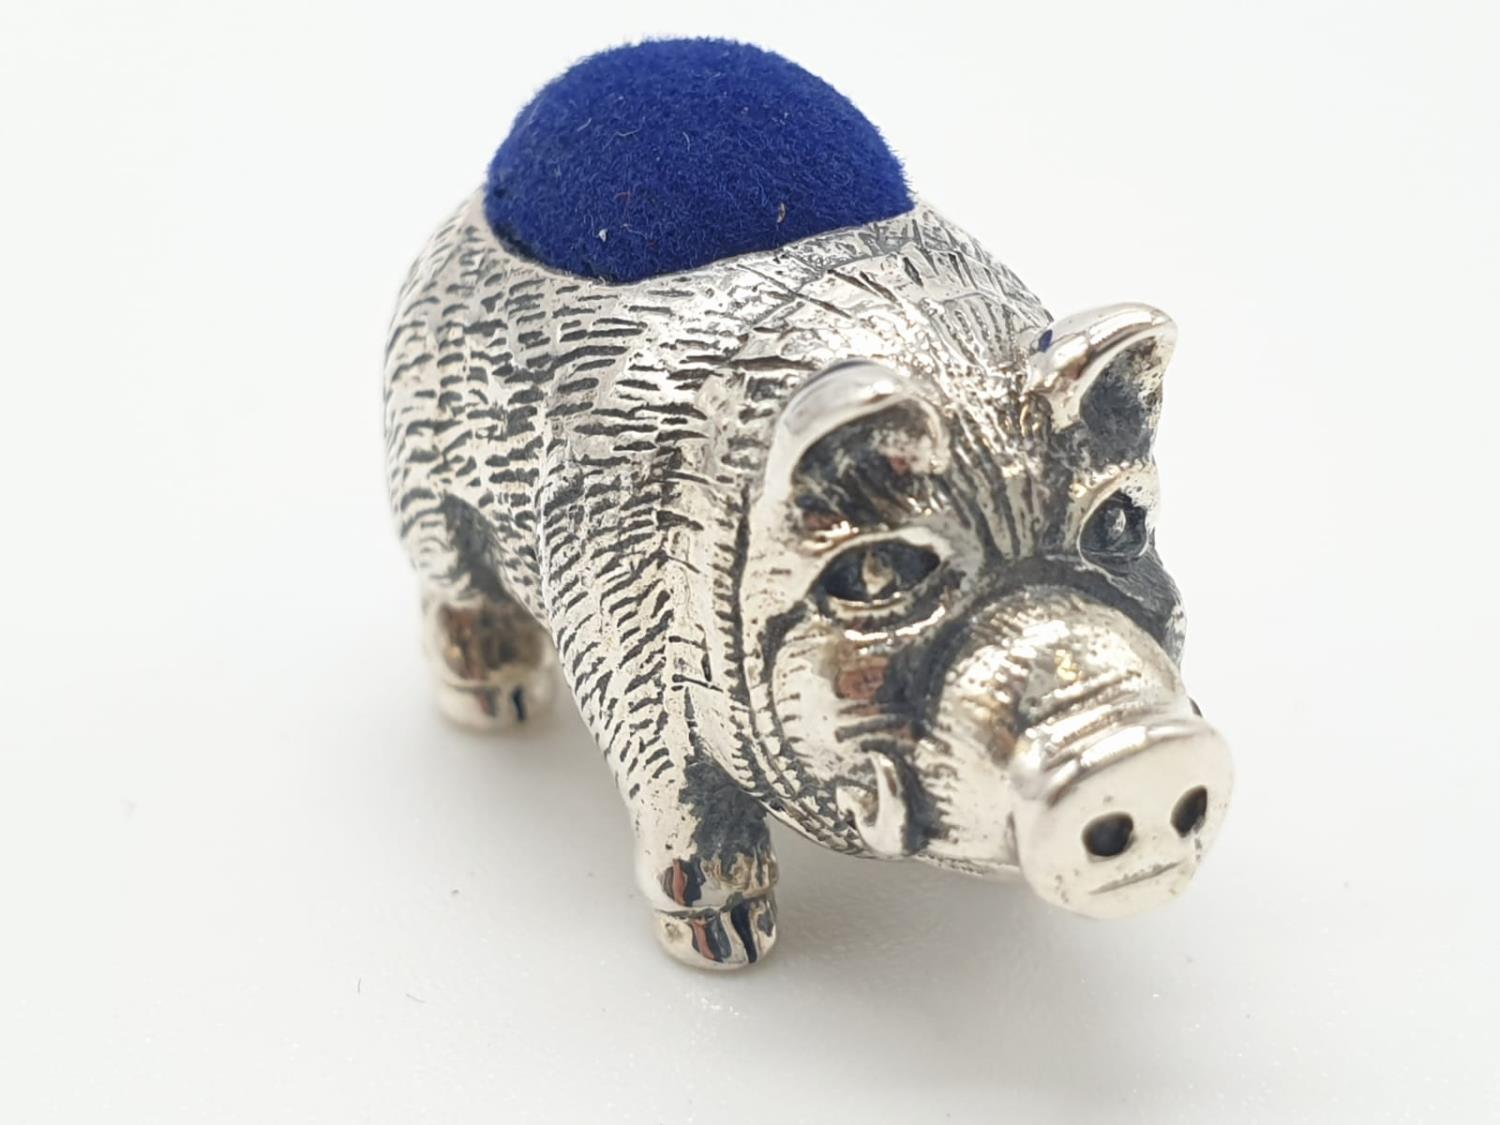 Silver pin cushion in the form of a pig or boar, 2.7cm approx